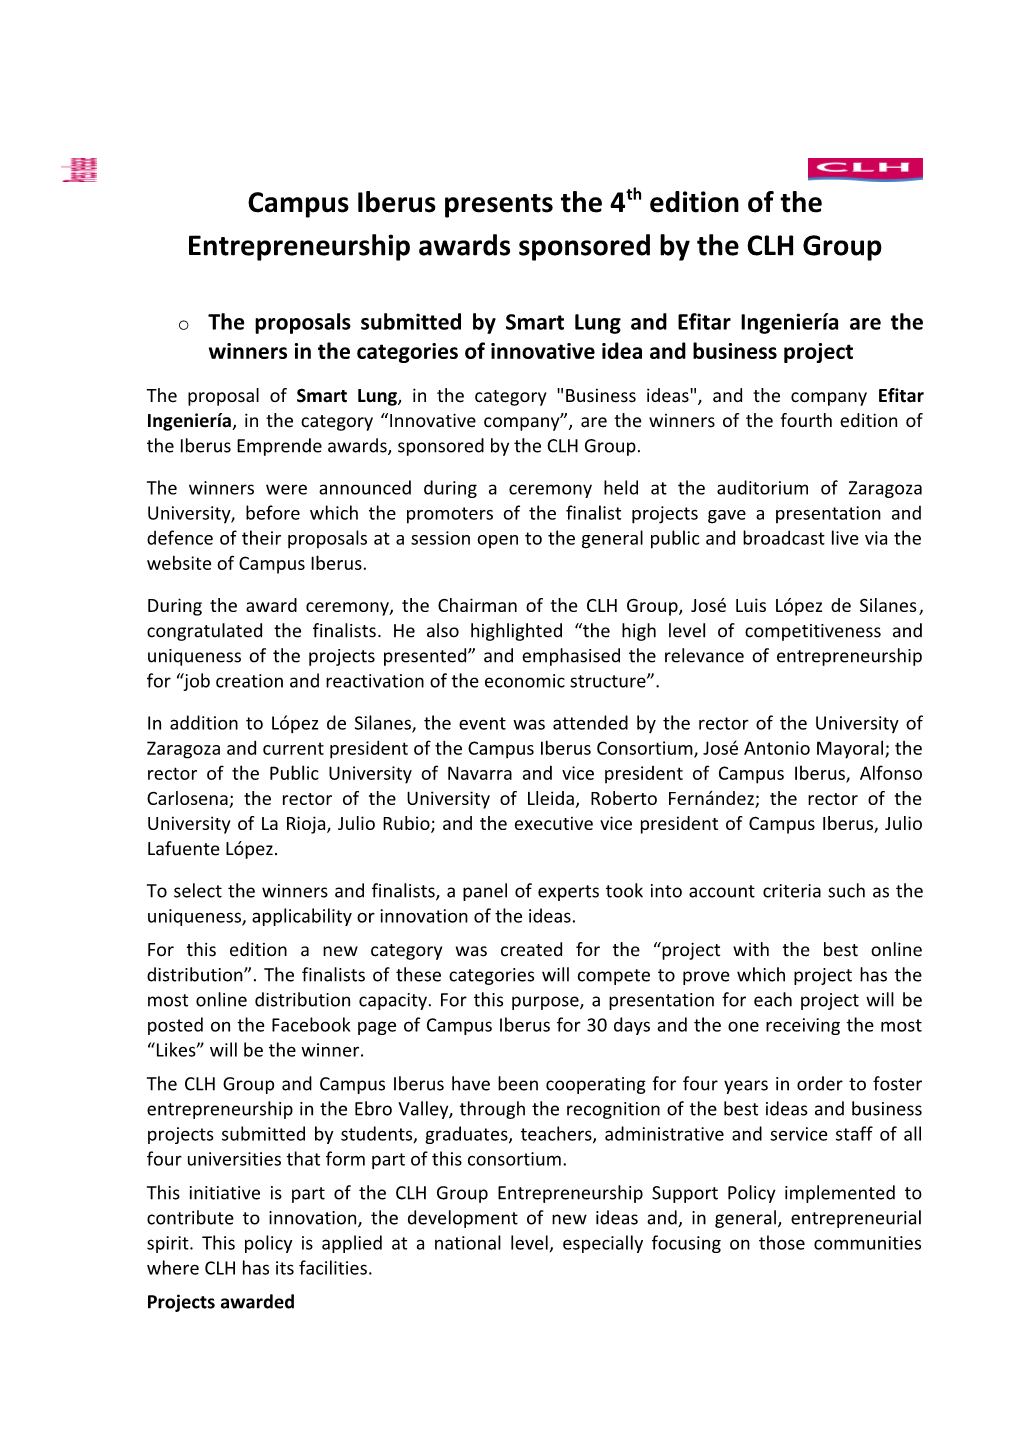 Campus Iberus Presents the 4Thedition of the Entrepreneurship Awards Sponsored by The